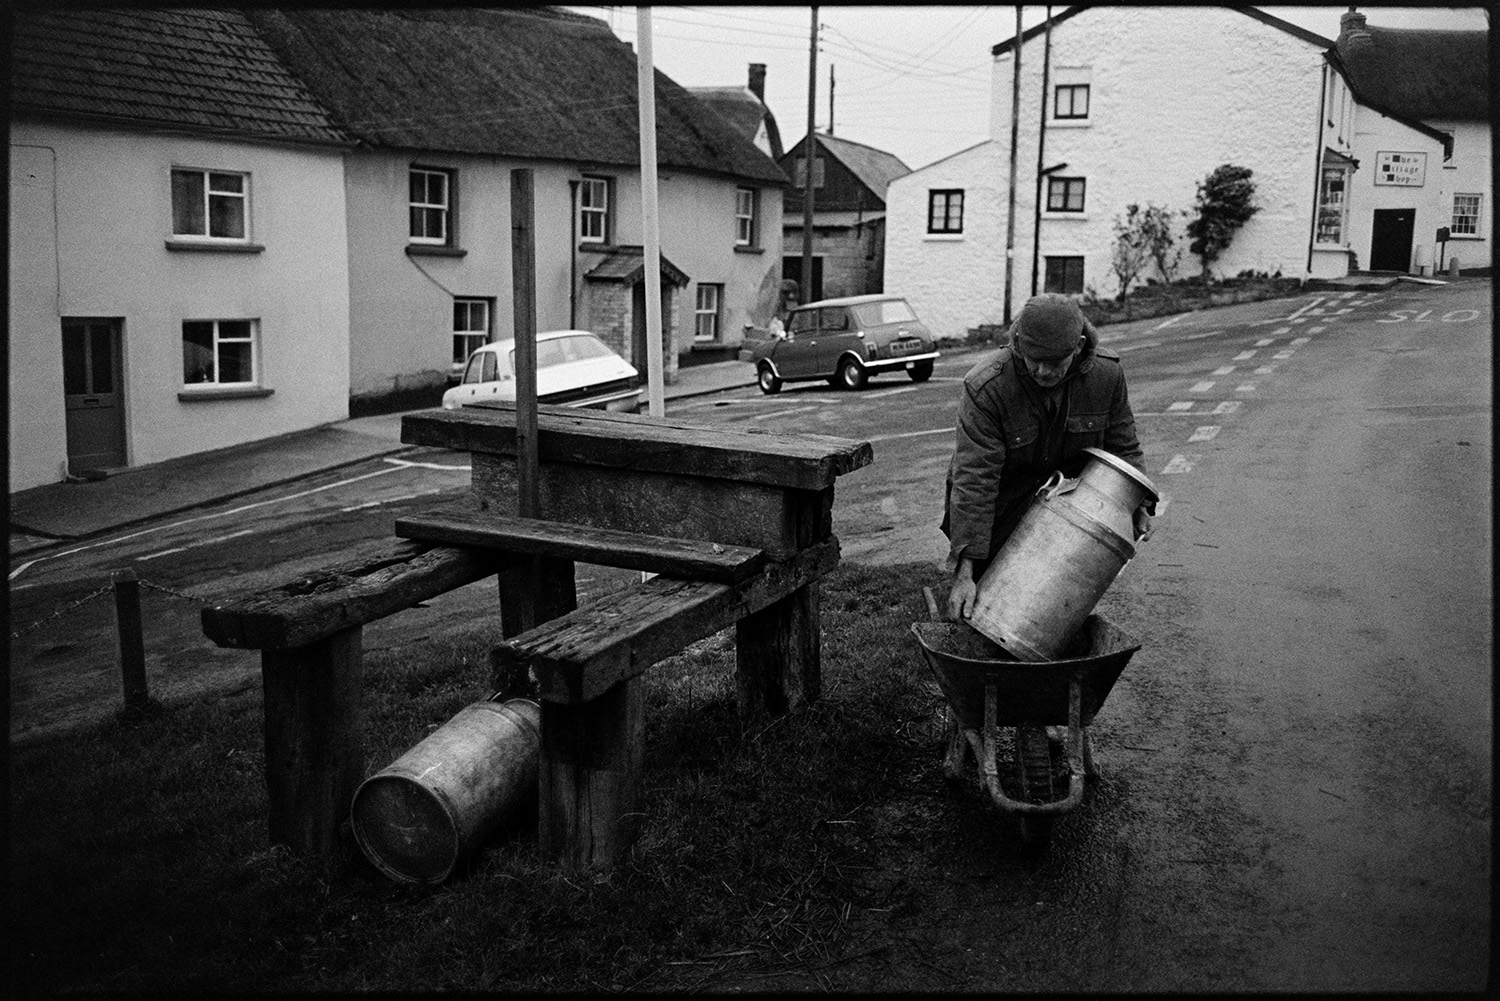 Farmer taking milk churn to stand in middle of village. 
[Jim Woolacott lifting a milk churn out of a wheelbarrow and placing it on a wooden milk churn stand in Atherington.]